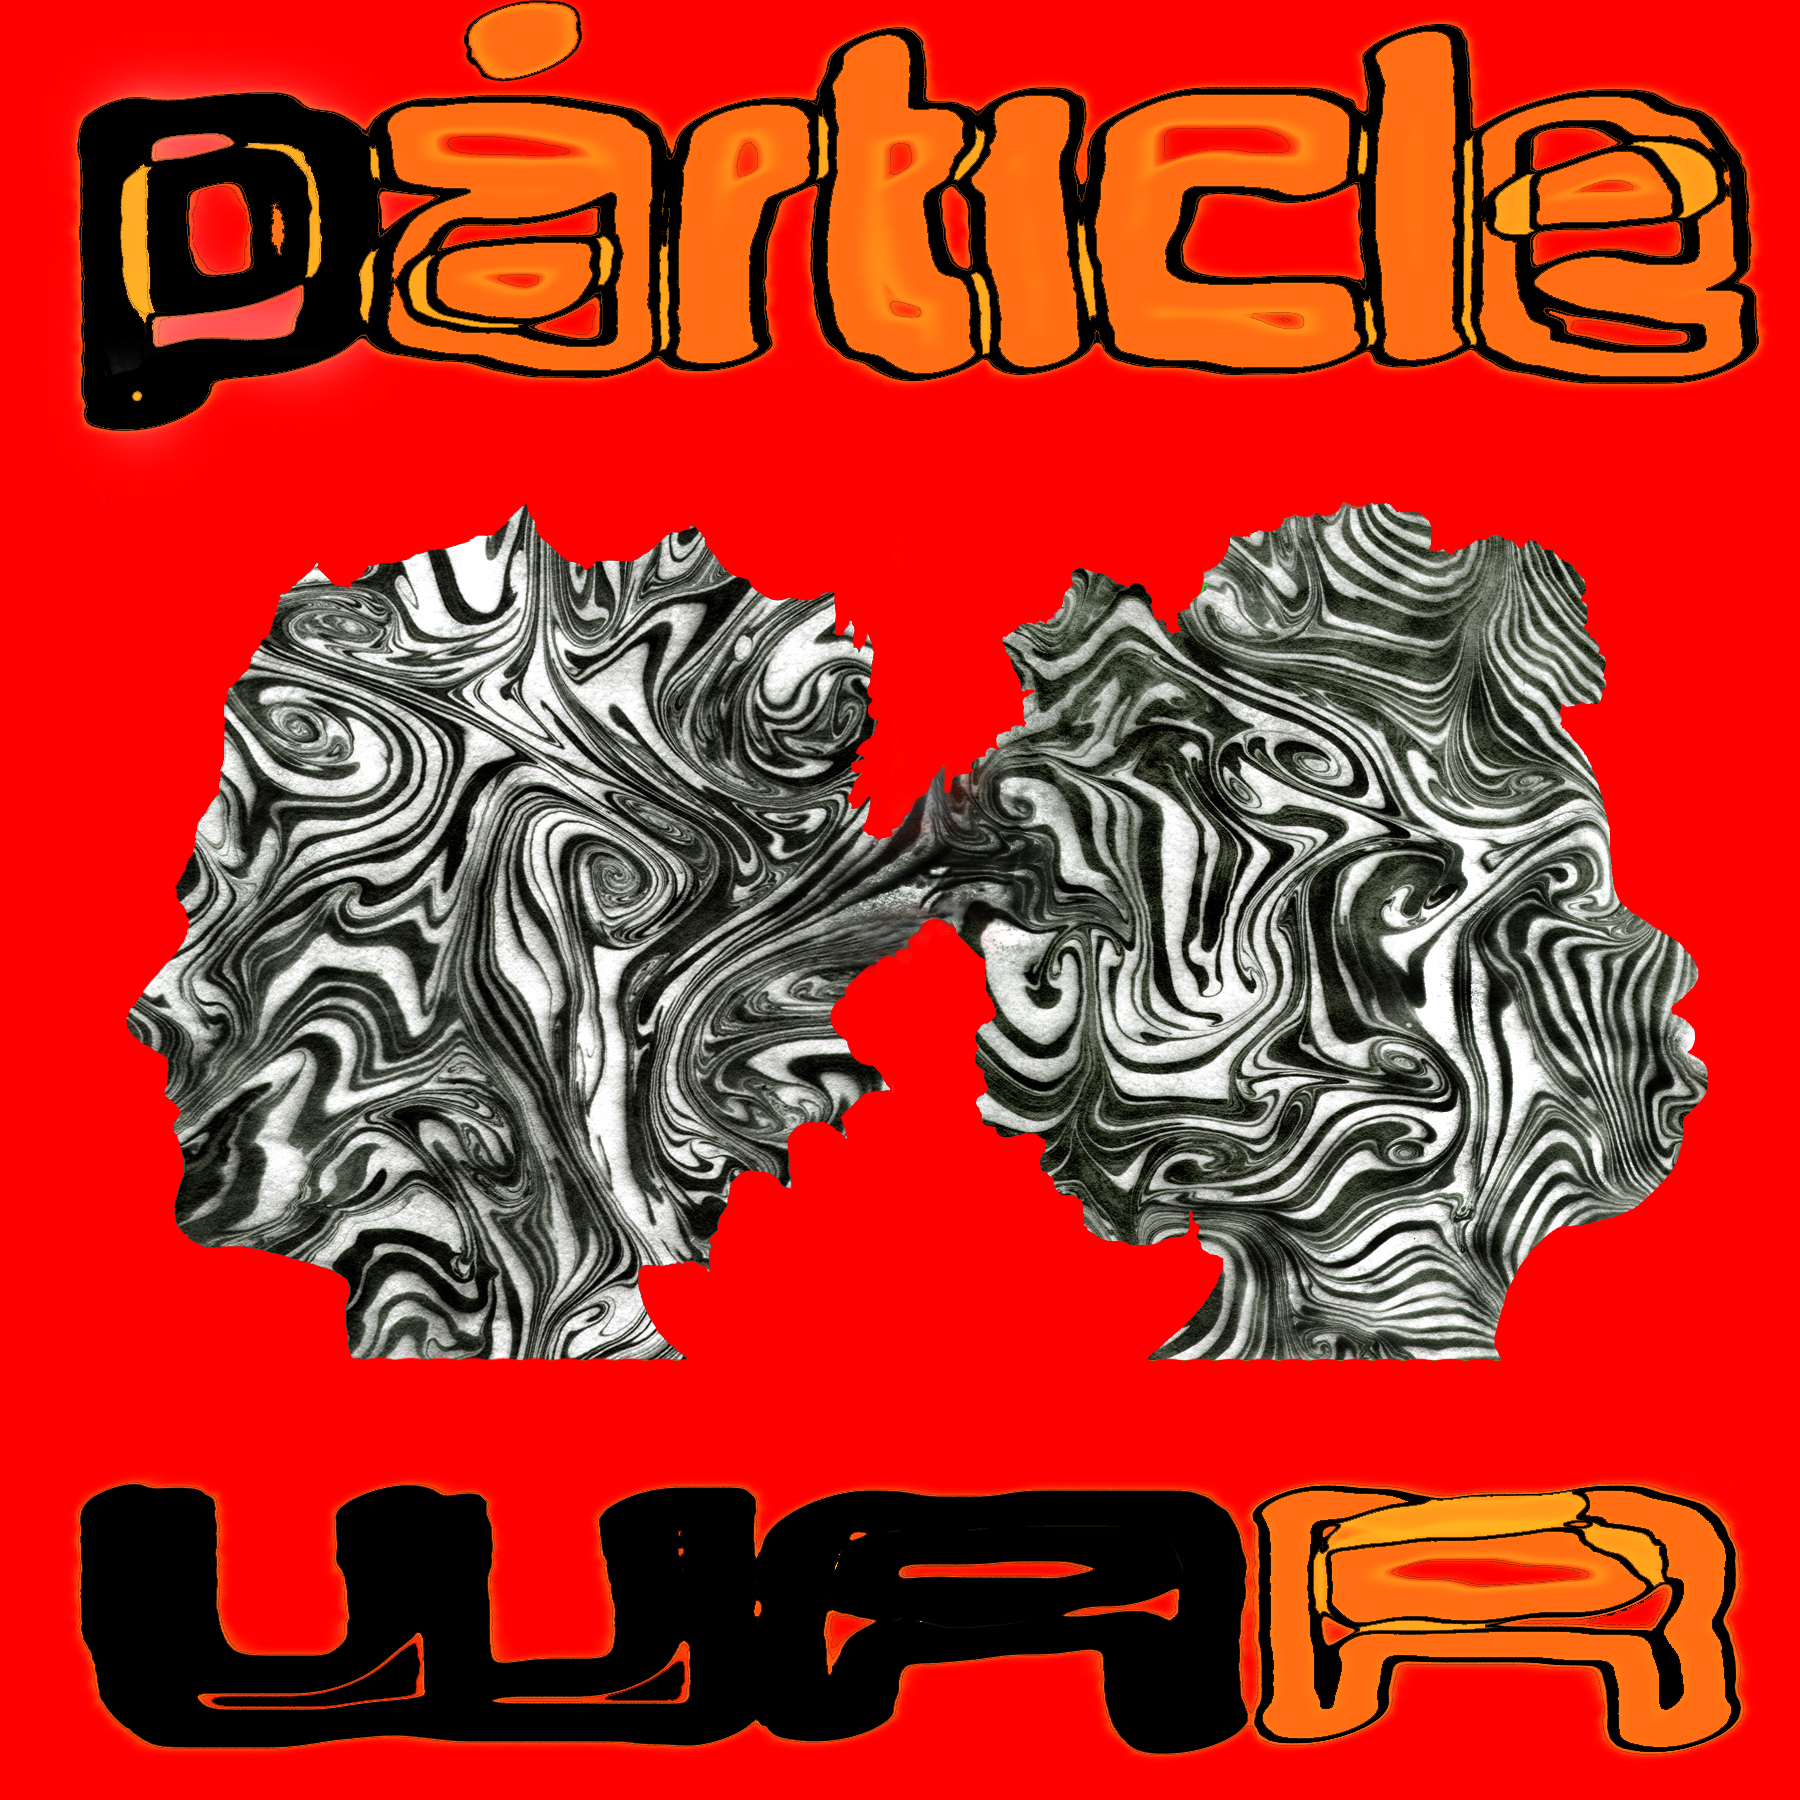 Particle_War_ALBUMCOVER.jpg